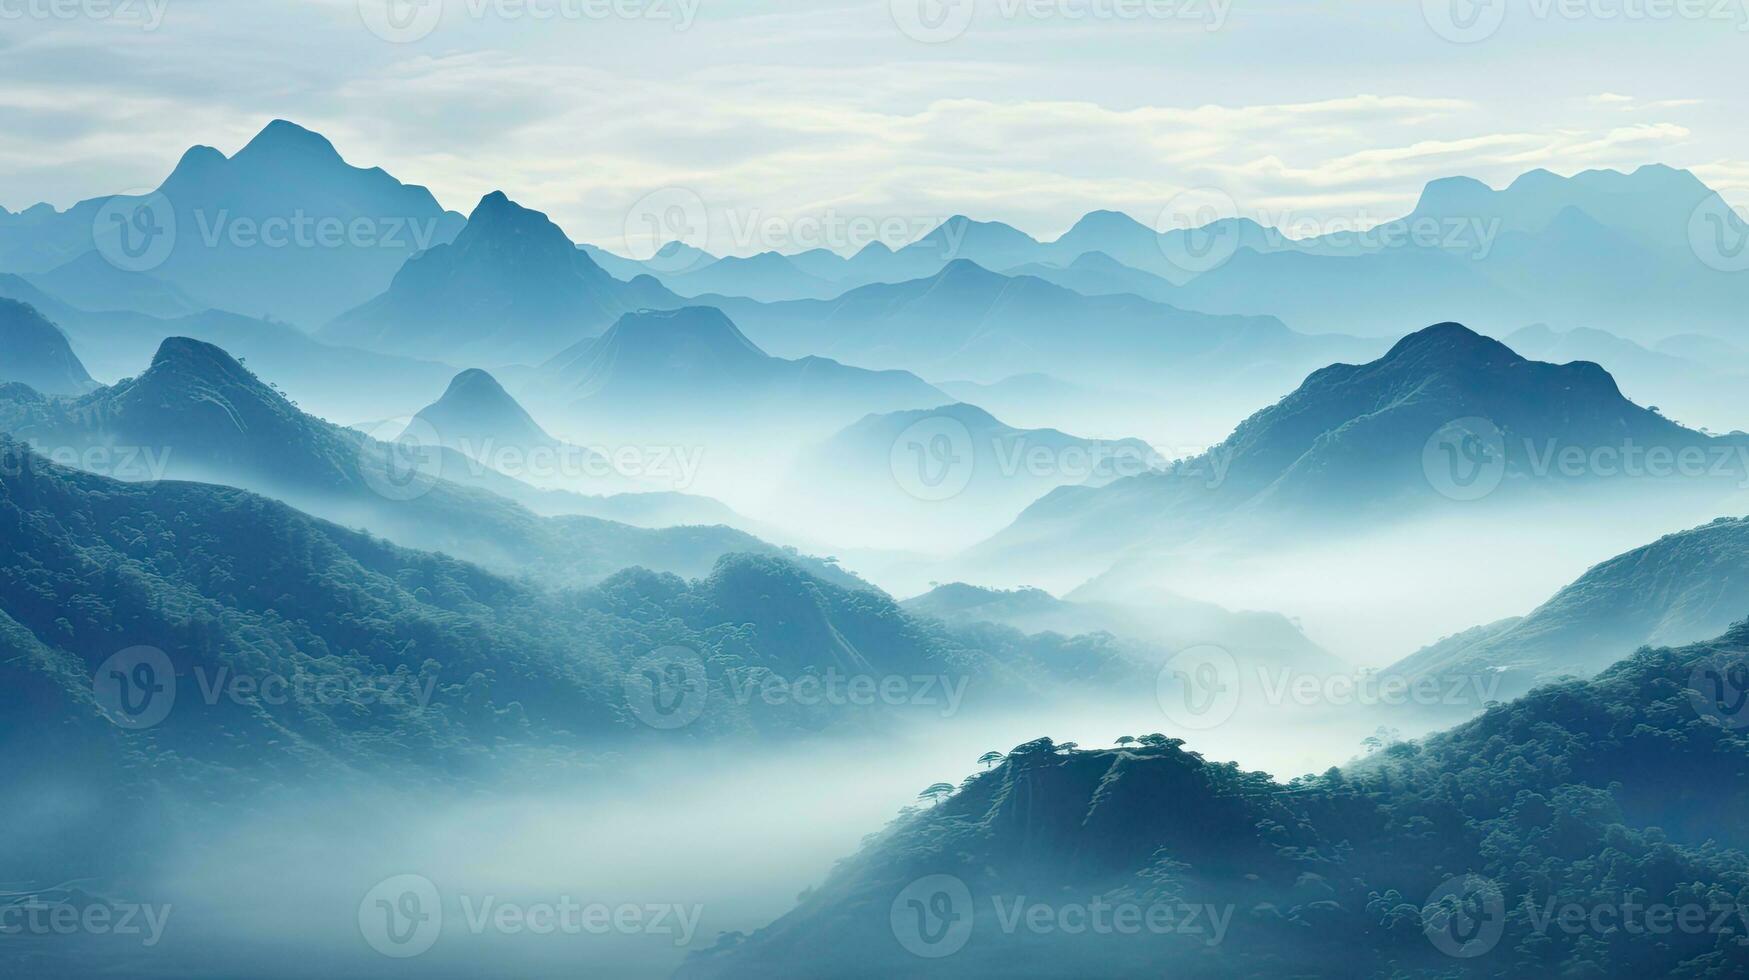 Beautiful Indian mountains with silhouettes visible through fog in Manila valley photo